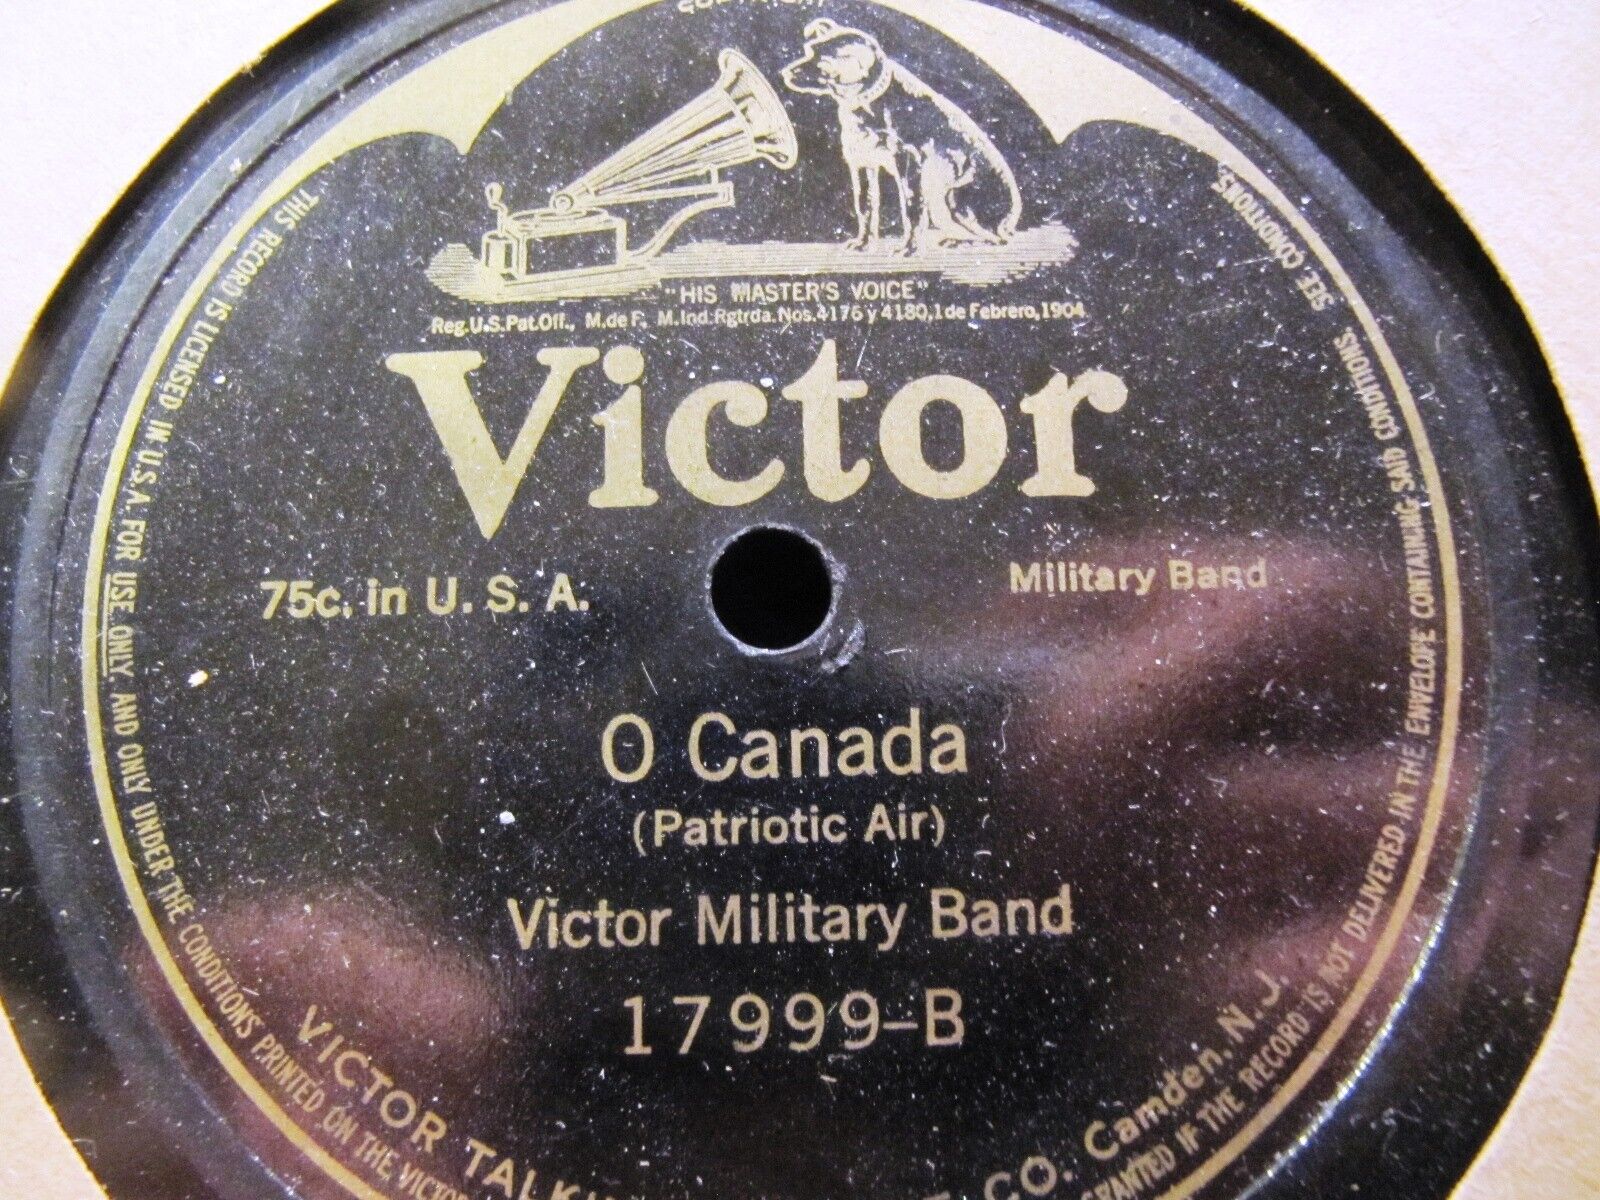 1915 CANADIAN NATIONAL ANTHEM Maple Leaf Forever/ O Canada VICTOR MILITARY BAND